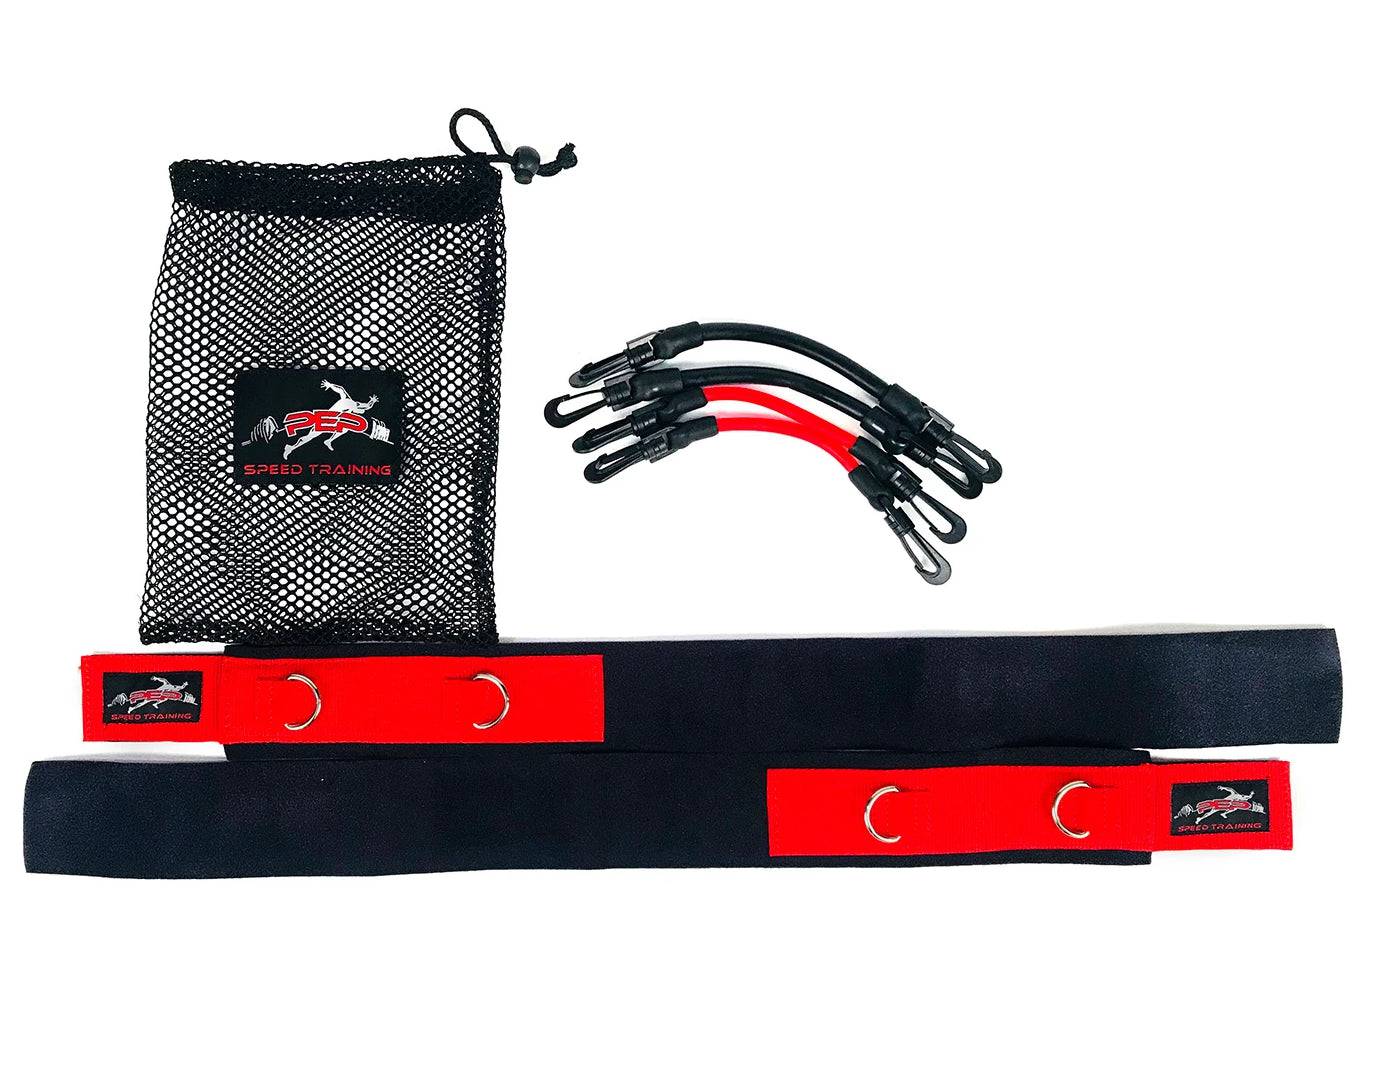 PEPFast | Speed Bands - Knee - XTC Fitness - Exercise Equipment Superstore - Canada - Speed Bands